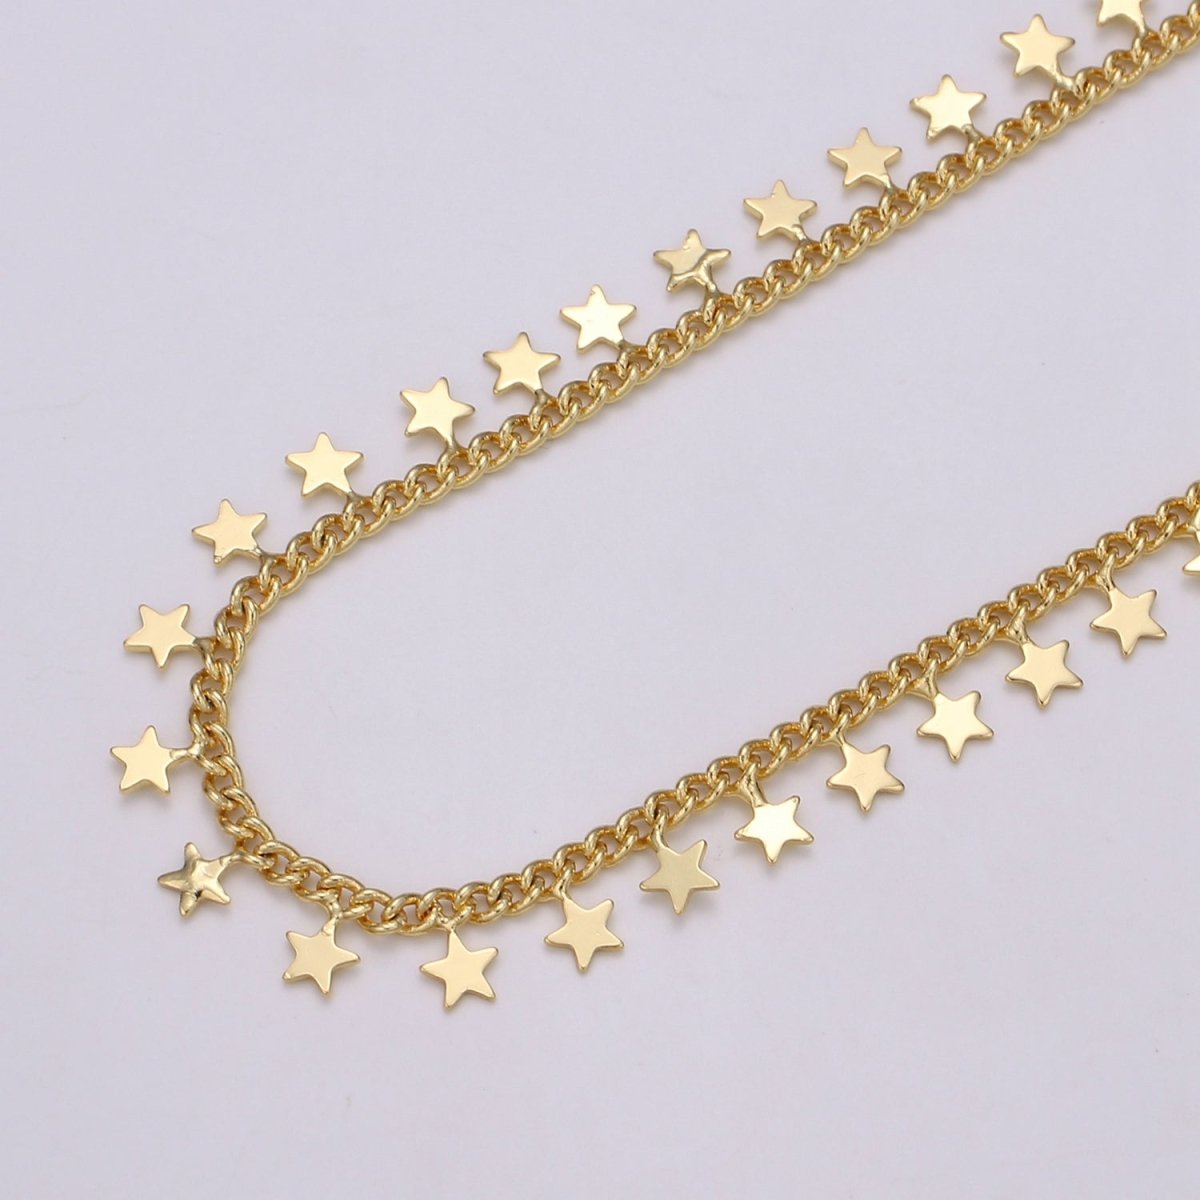 24K Gold Filled Stars Charmed Chain By Yard, Wholesale Twisted Curb Chain, Unfinished CURB DESIGNED Chain For Jewelry Making | ROLL-353 Clearance Pricing - DLUXCA